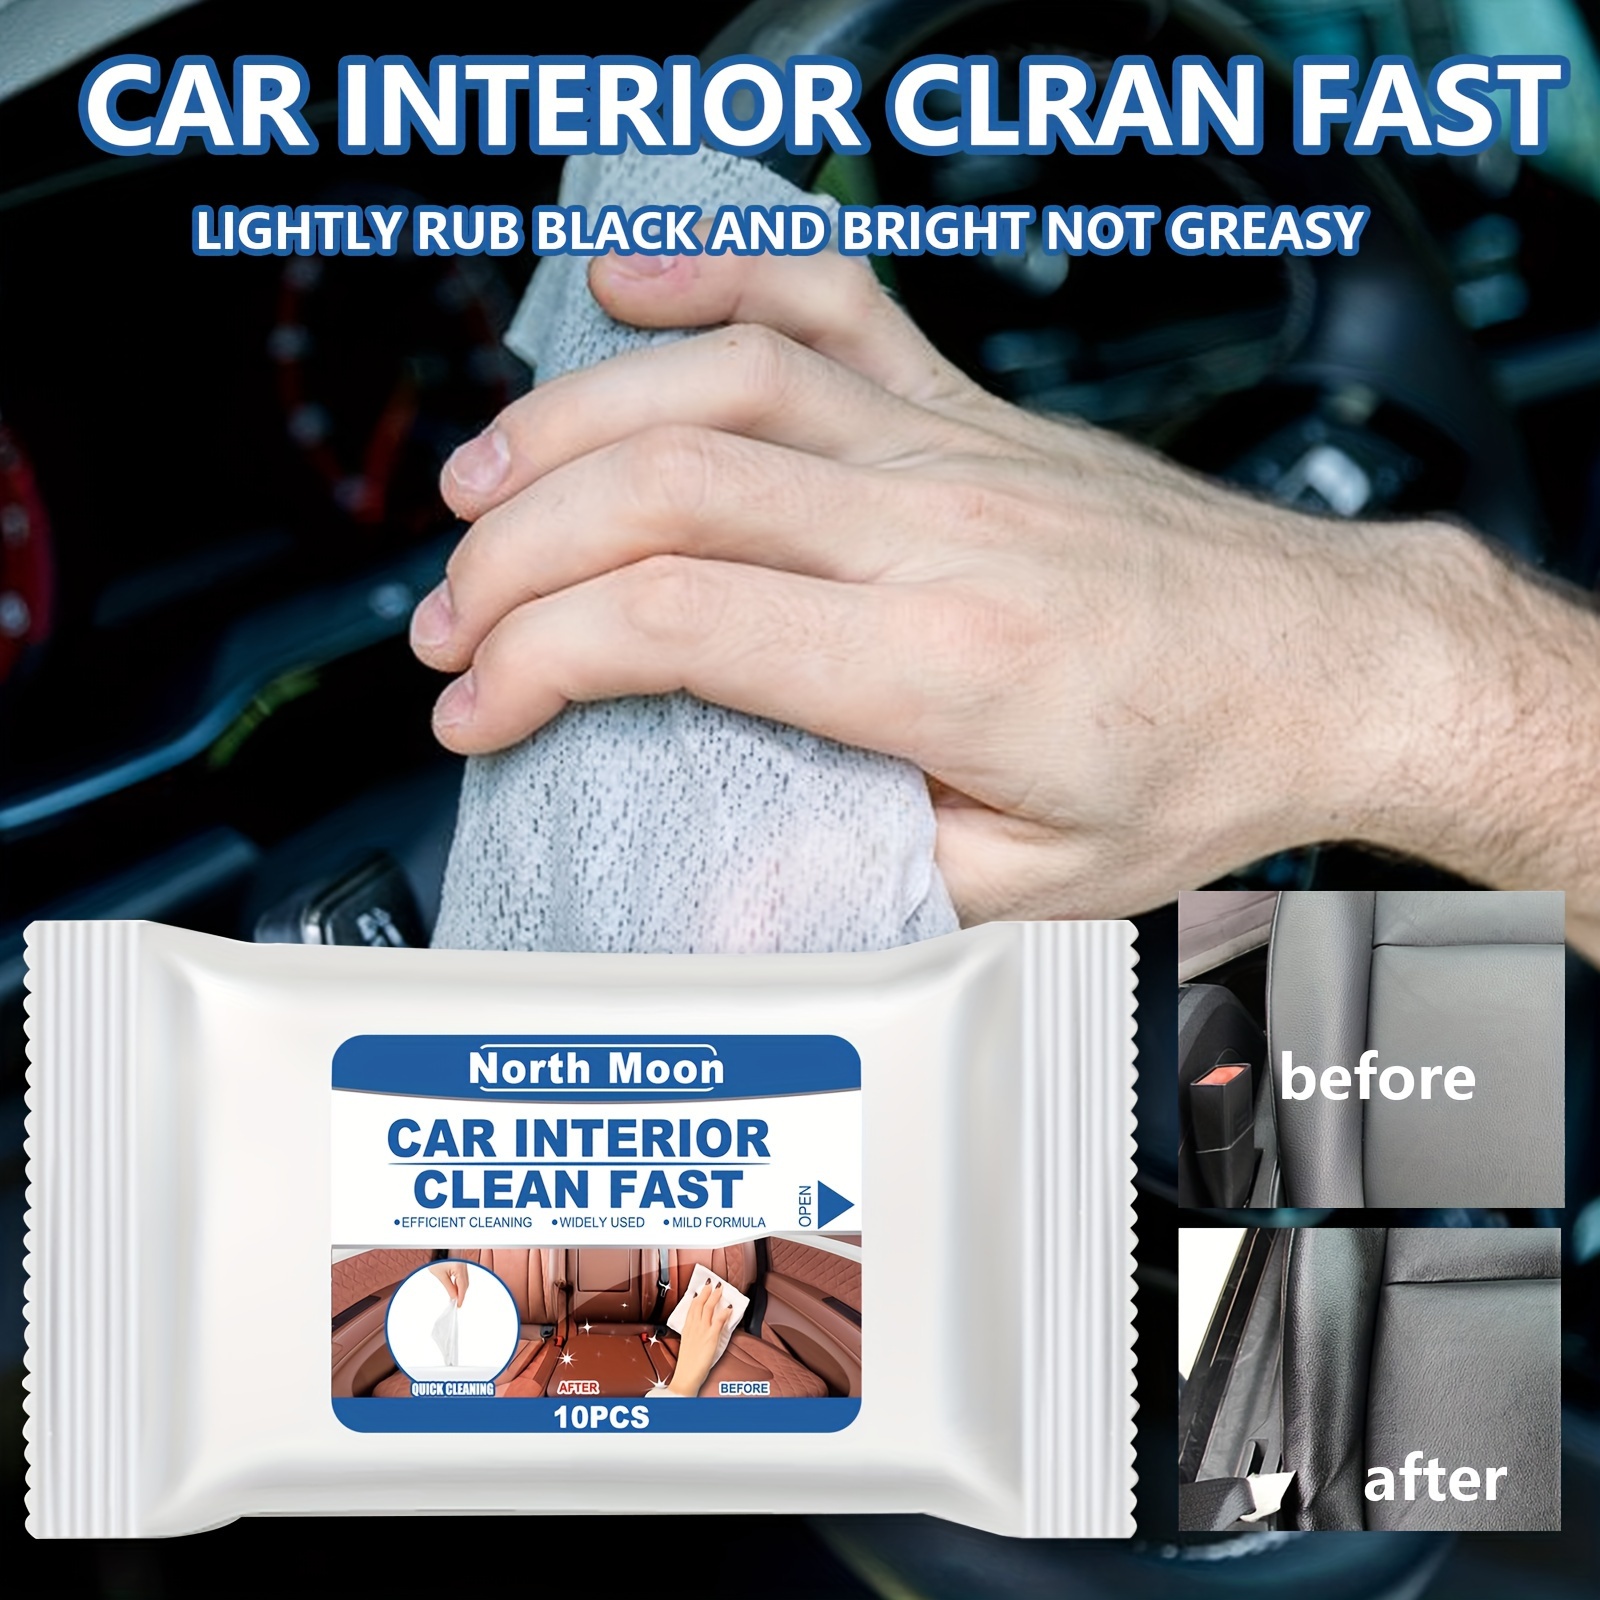 Multi Cleaning Wipes, Interior Cleaning, Car Wash, Product Information